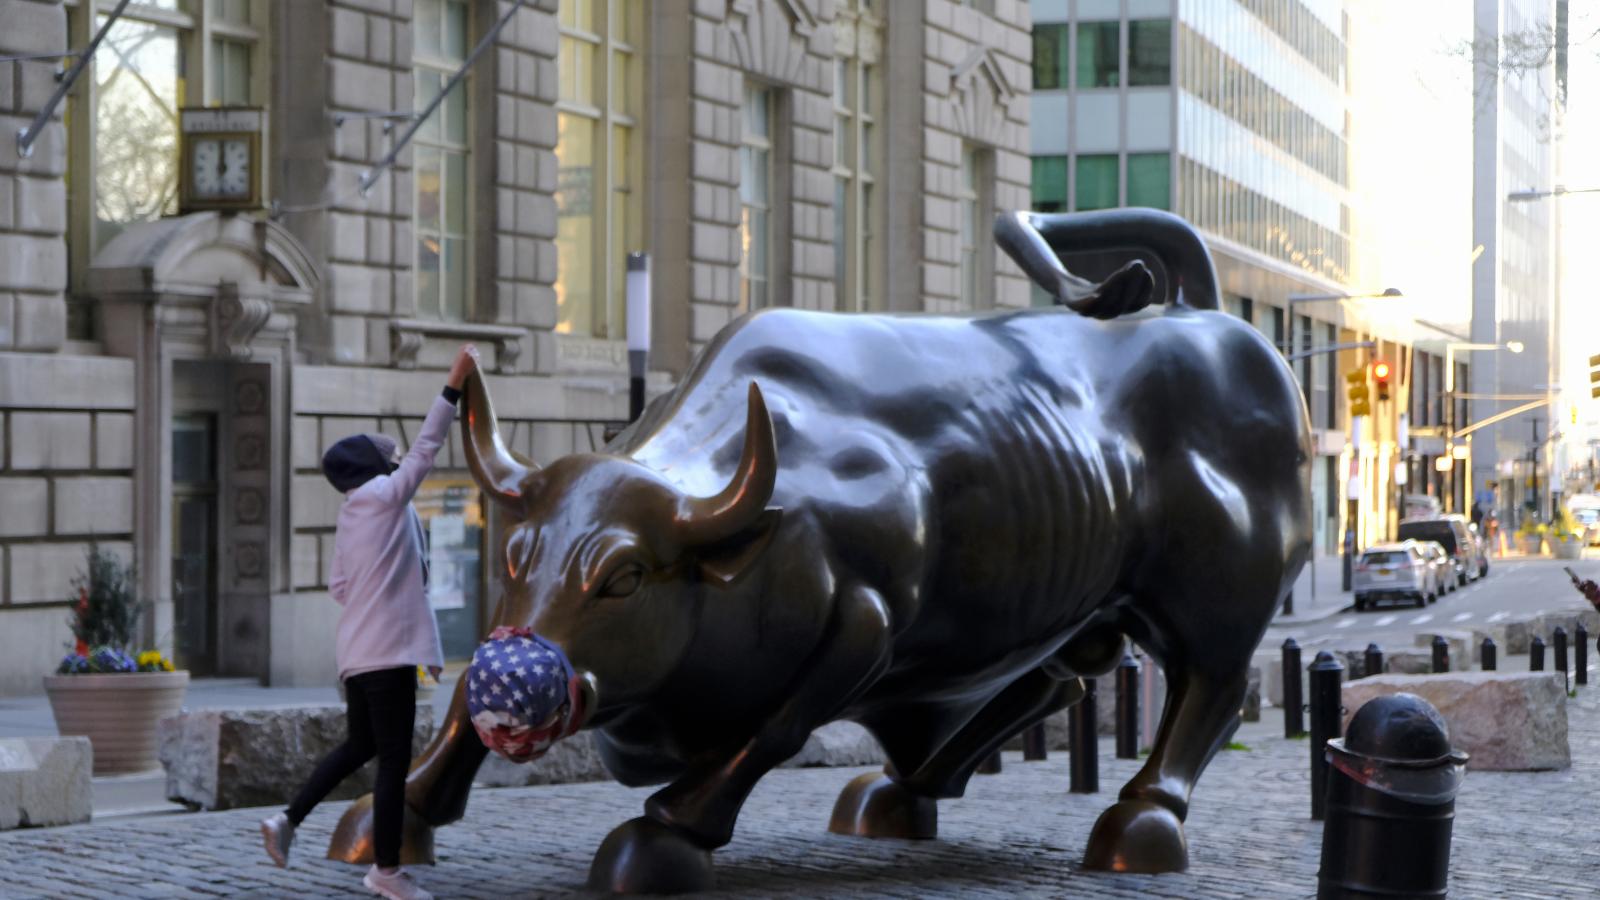 Image from Photojournalism - New York - April 22, 2020 -- The Charging Bull on...